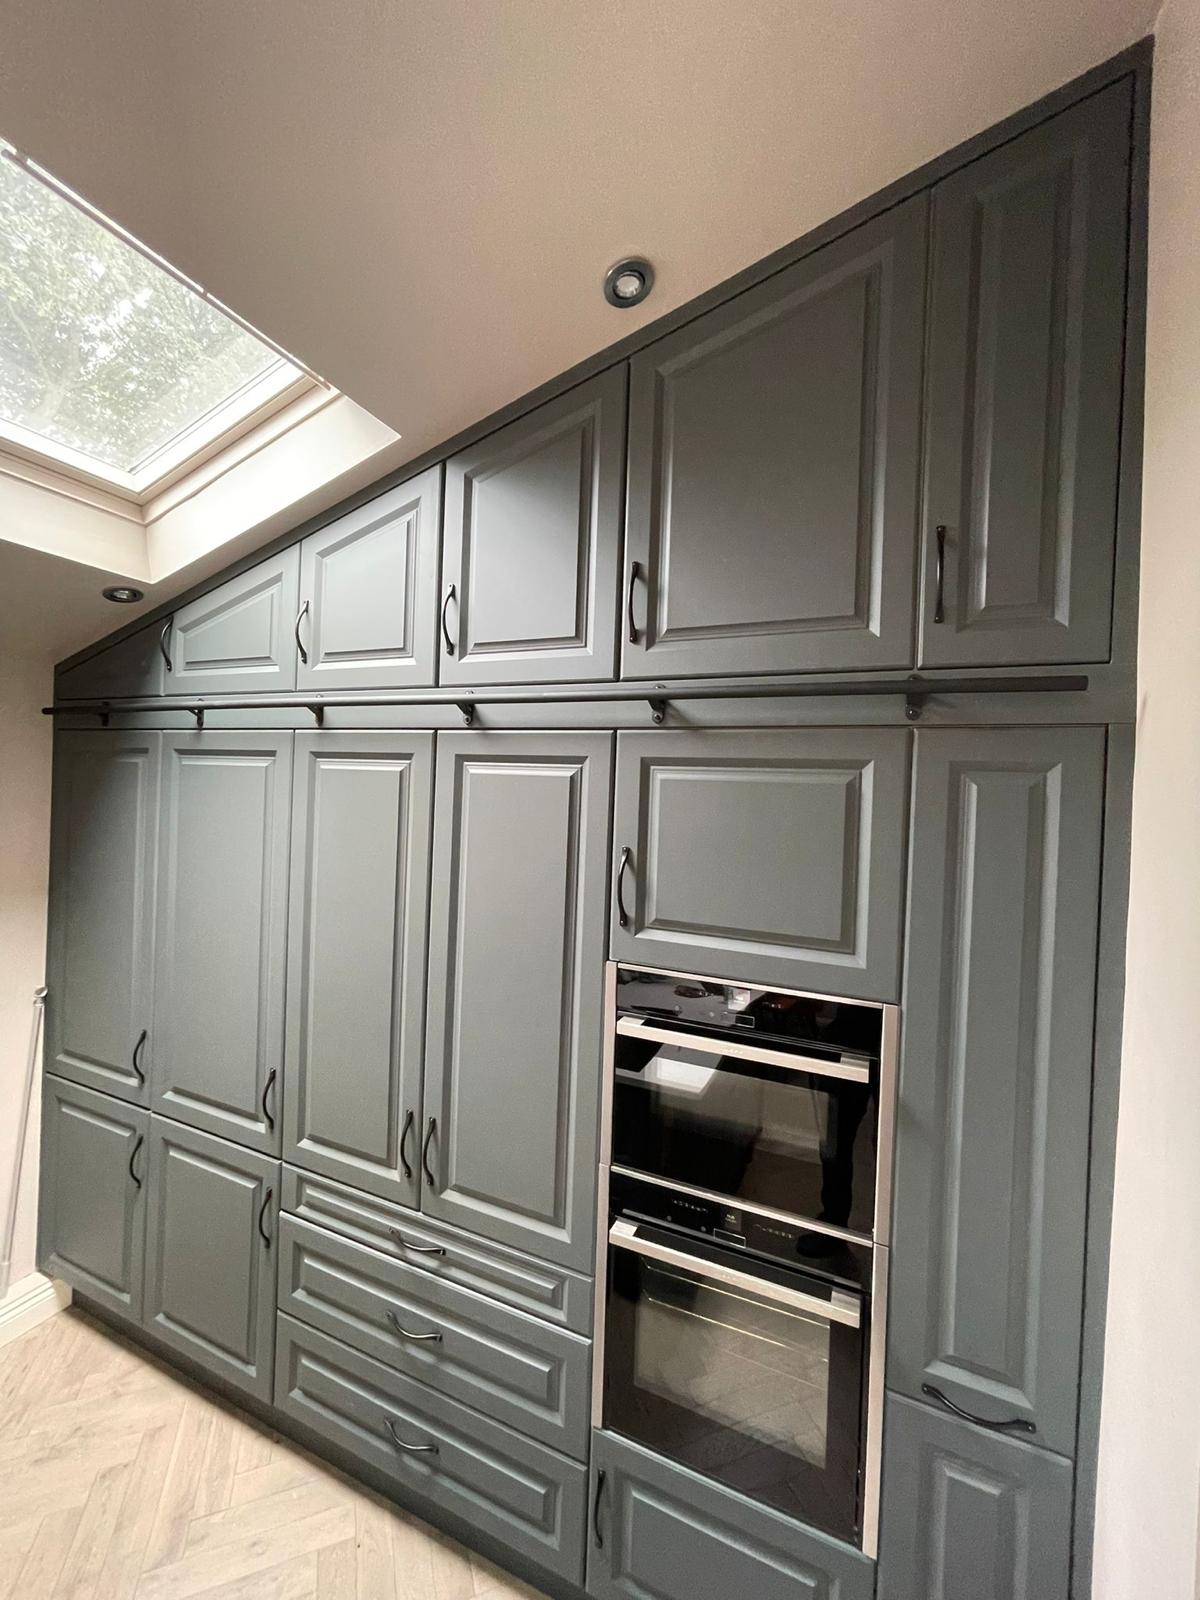 Made to measure Kitchen supplied and installed in Harrogate Featuring traditional styles finished in super matt Kombu green by Bailey Joinery9